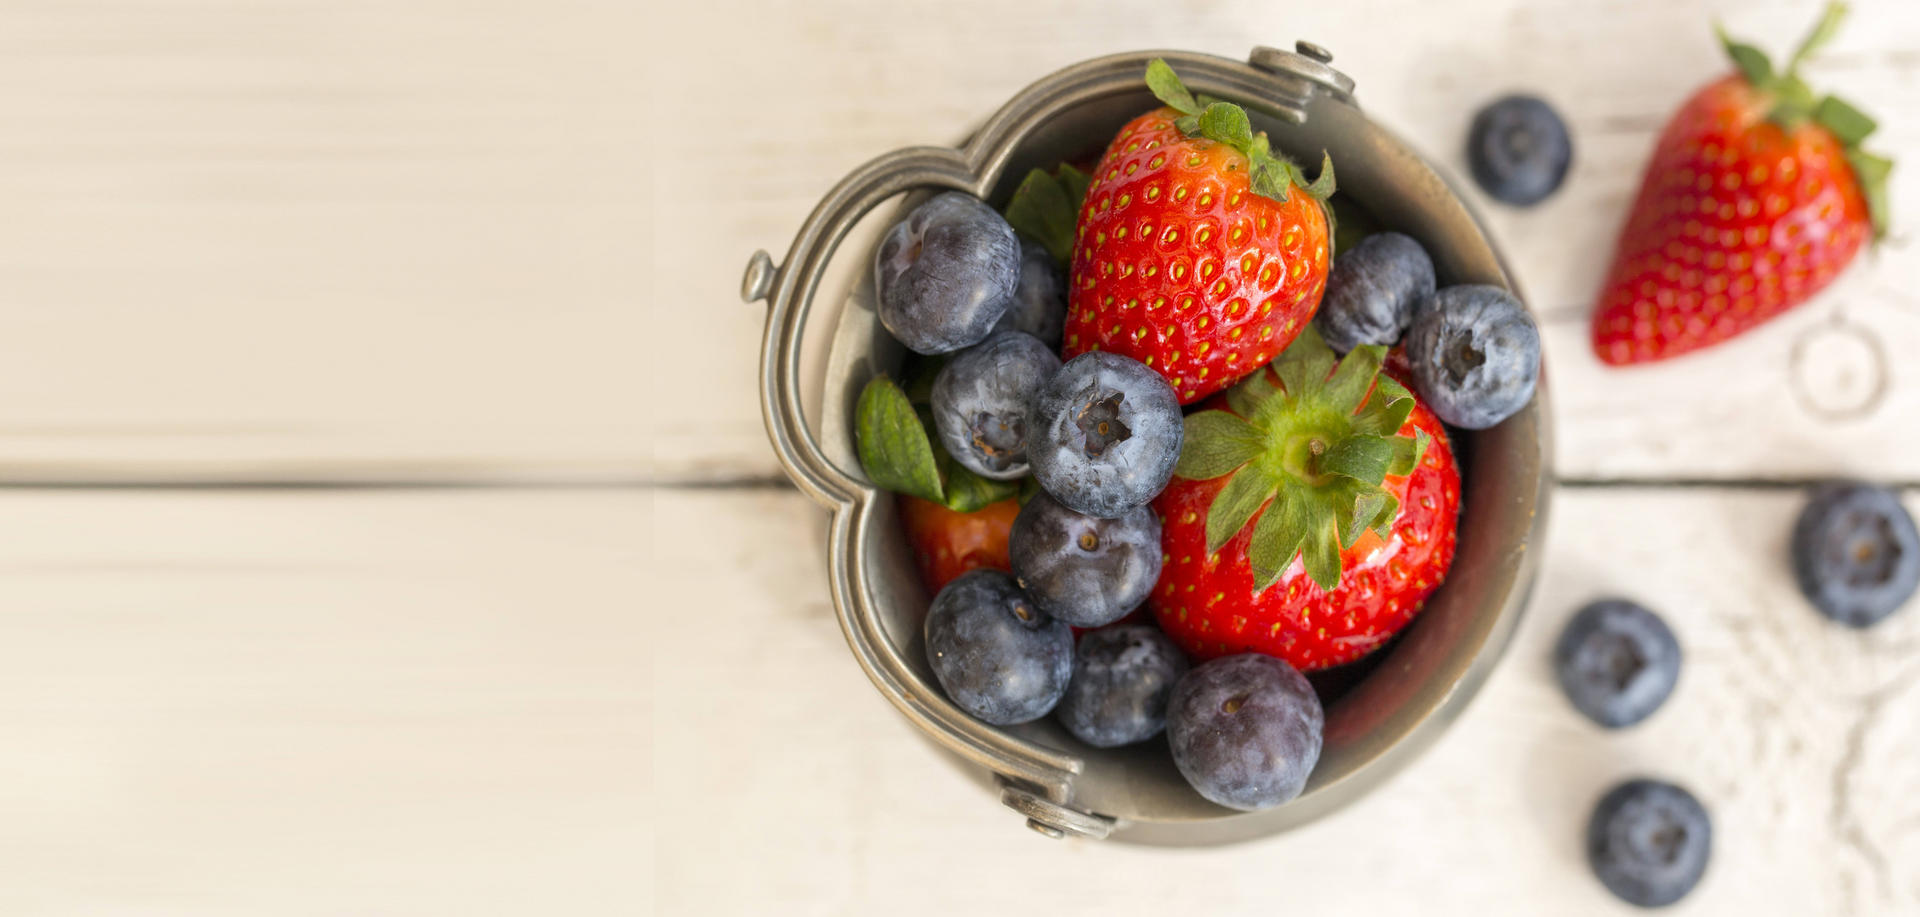  Strawberries are a better source of vitamin C and potassium. But for vitamin A, blueberries are more preferable. Both fruits contain anthocyanin (the red or purplish-blue pigment), which is anti-inflammatory and antioxidant.